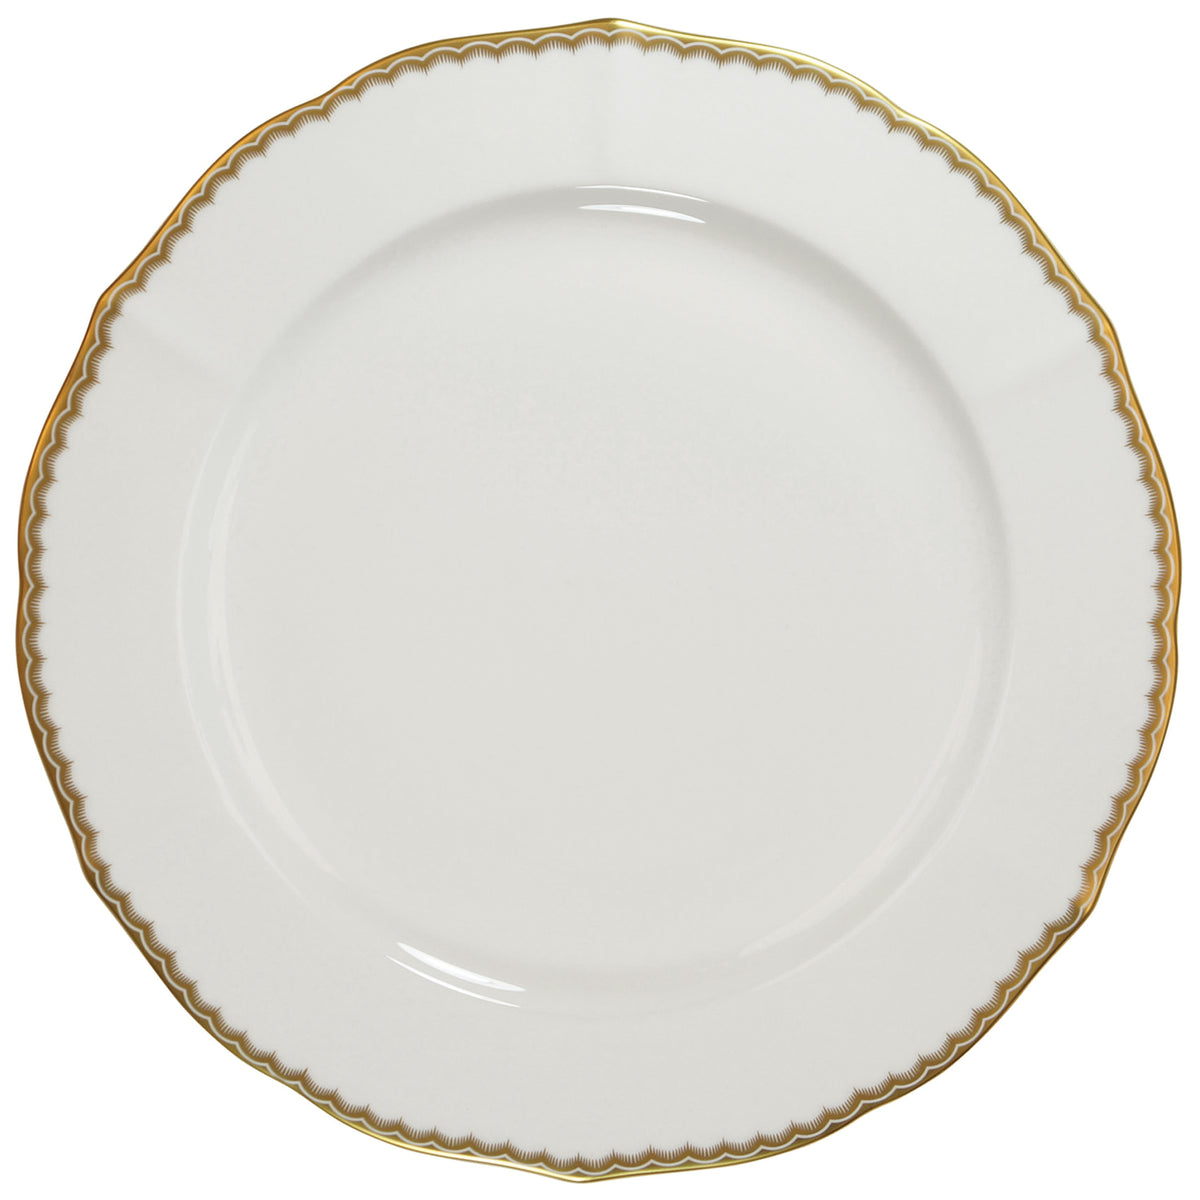 Antique Gold - Charger Plate